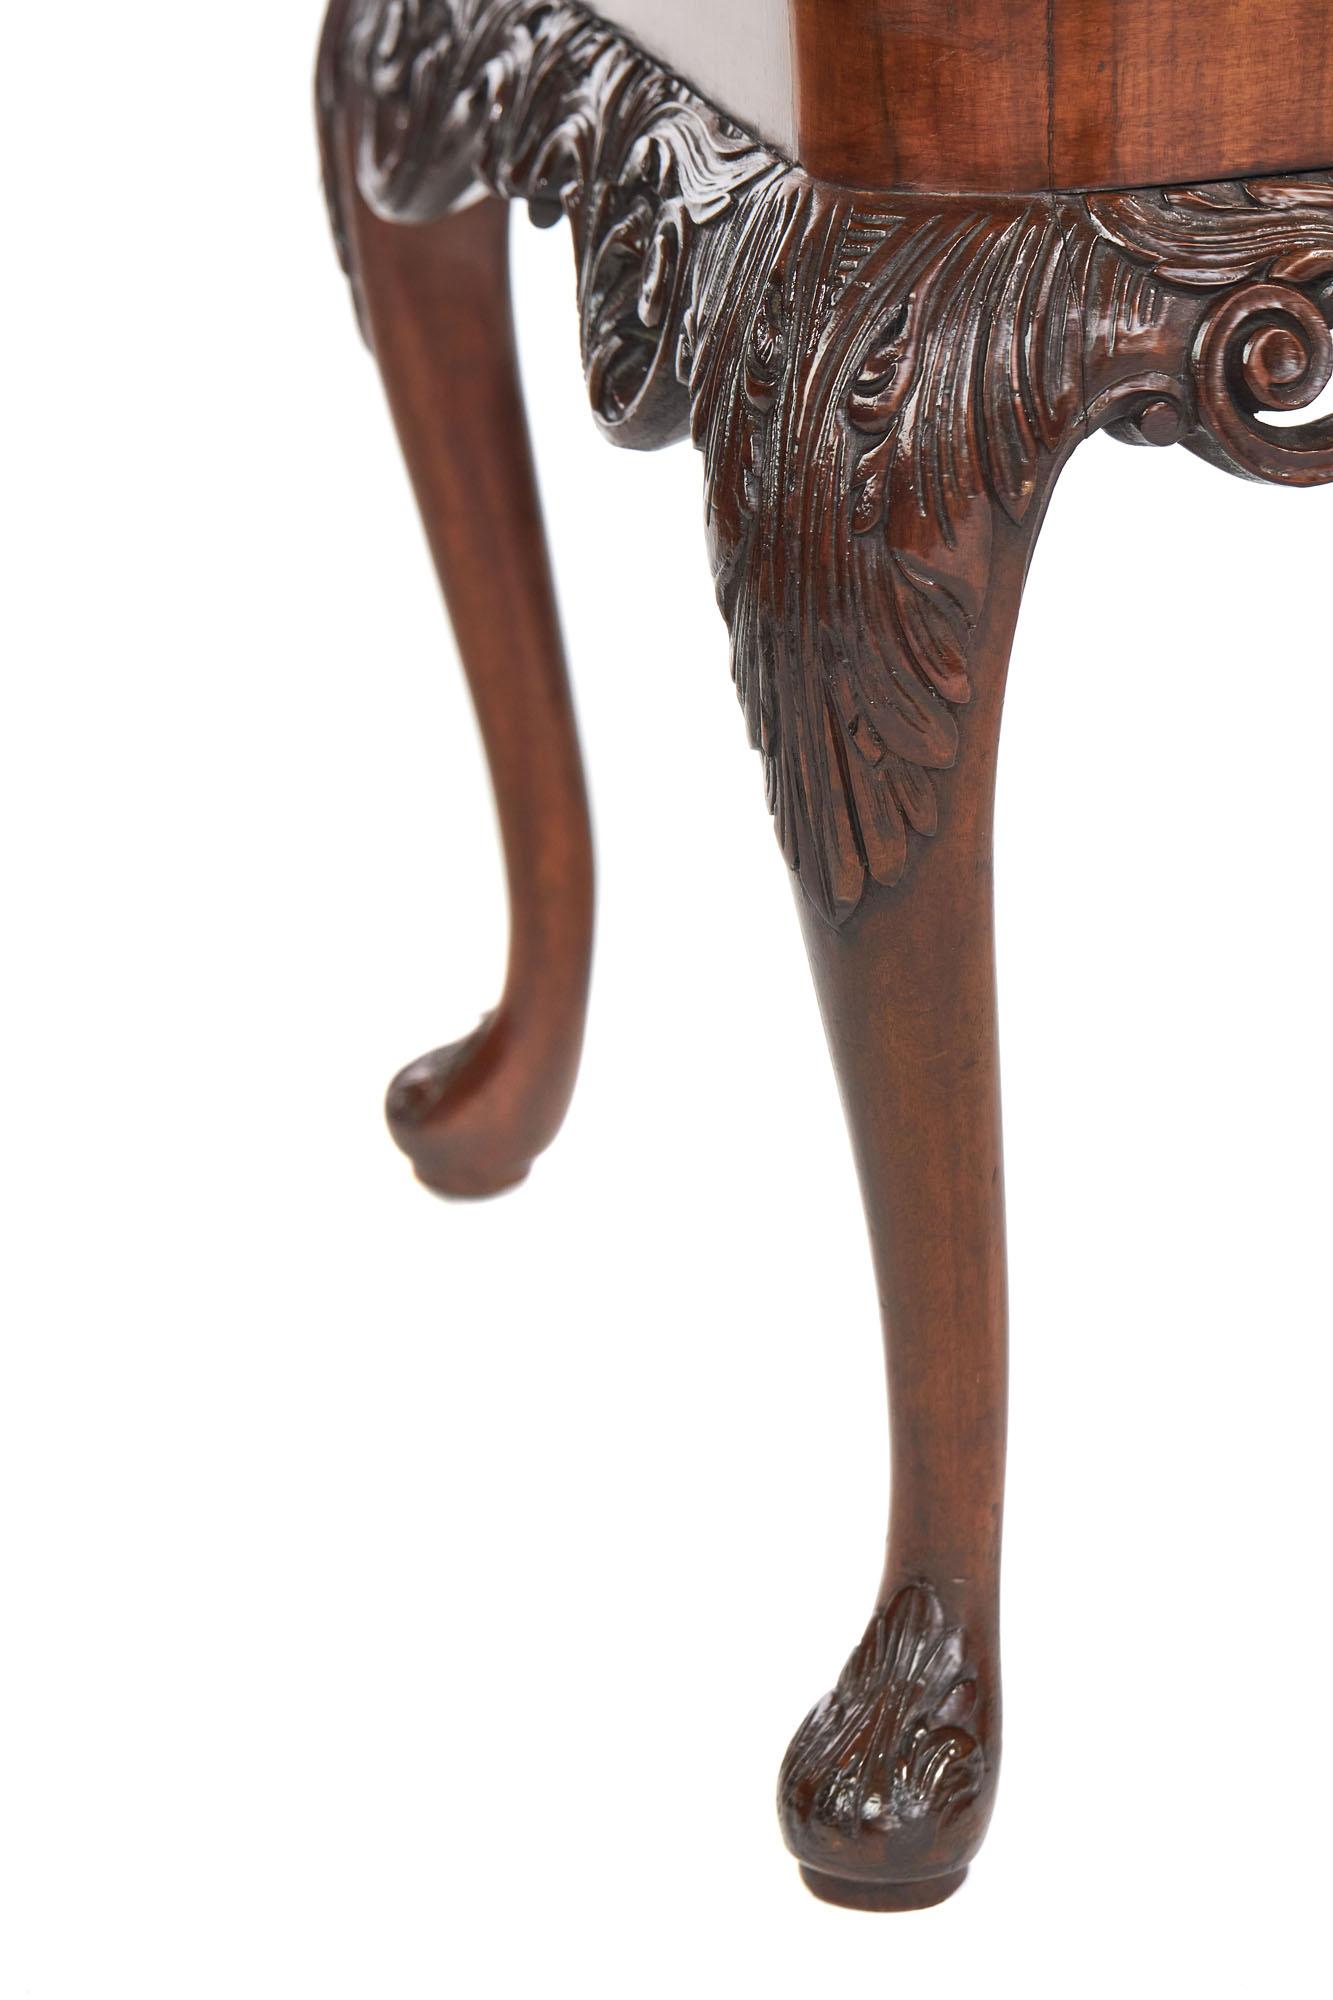 Antique carved burr walnut coffee table having a superior figured burr walnut top with a magnificent walnut pierced carved frieze depicting a scroll and leaf decoration. It stands on four solid walnut cabriole shaped legs with carved leaf detail to